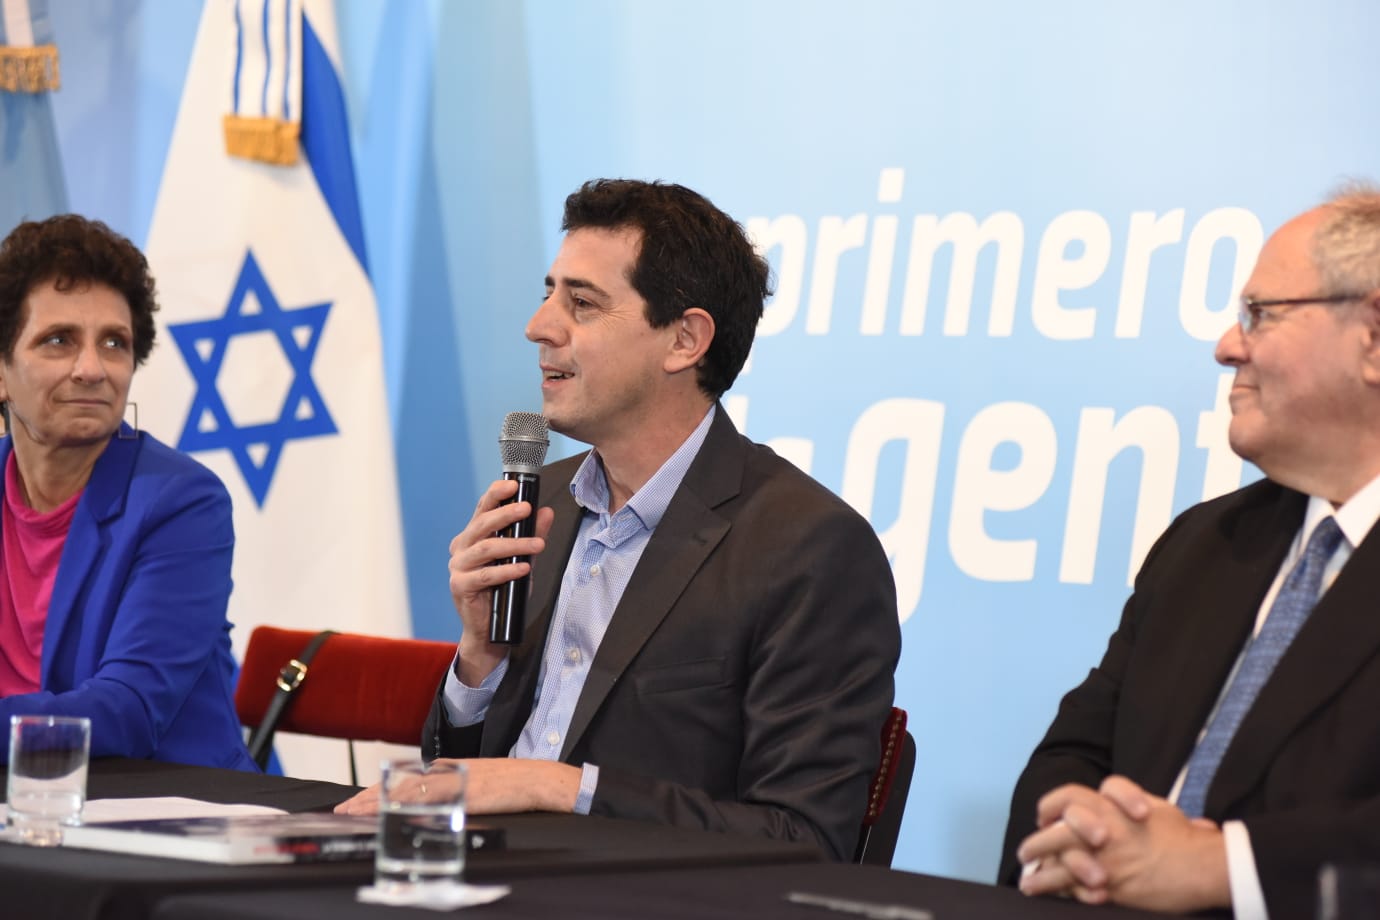 (L-R) Israel's Ambassador to Argentina Galit Ronen, Argentine Minister of the Interior Eduardo Enrique de Pedro and Yad Vashem Chairman Dani Dayan attend a joint press conference